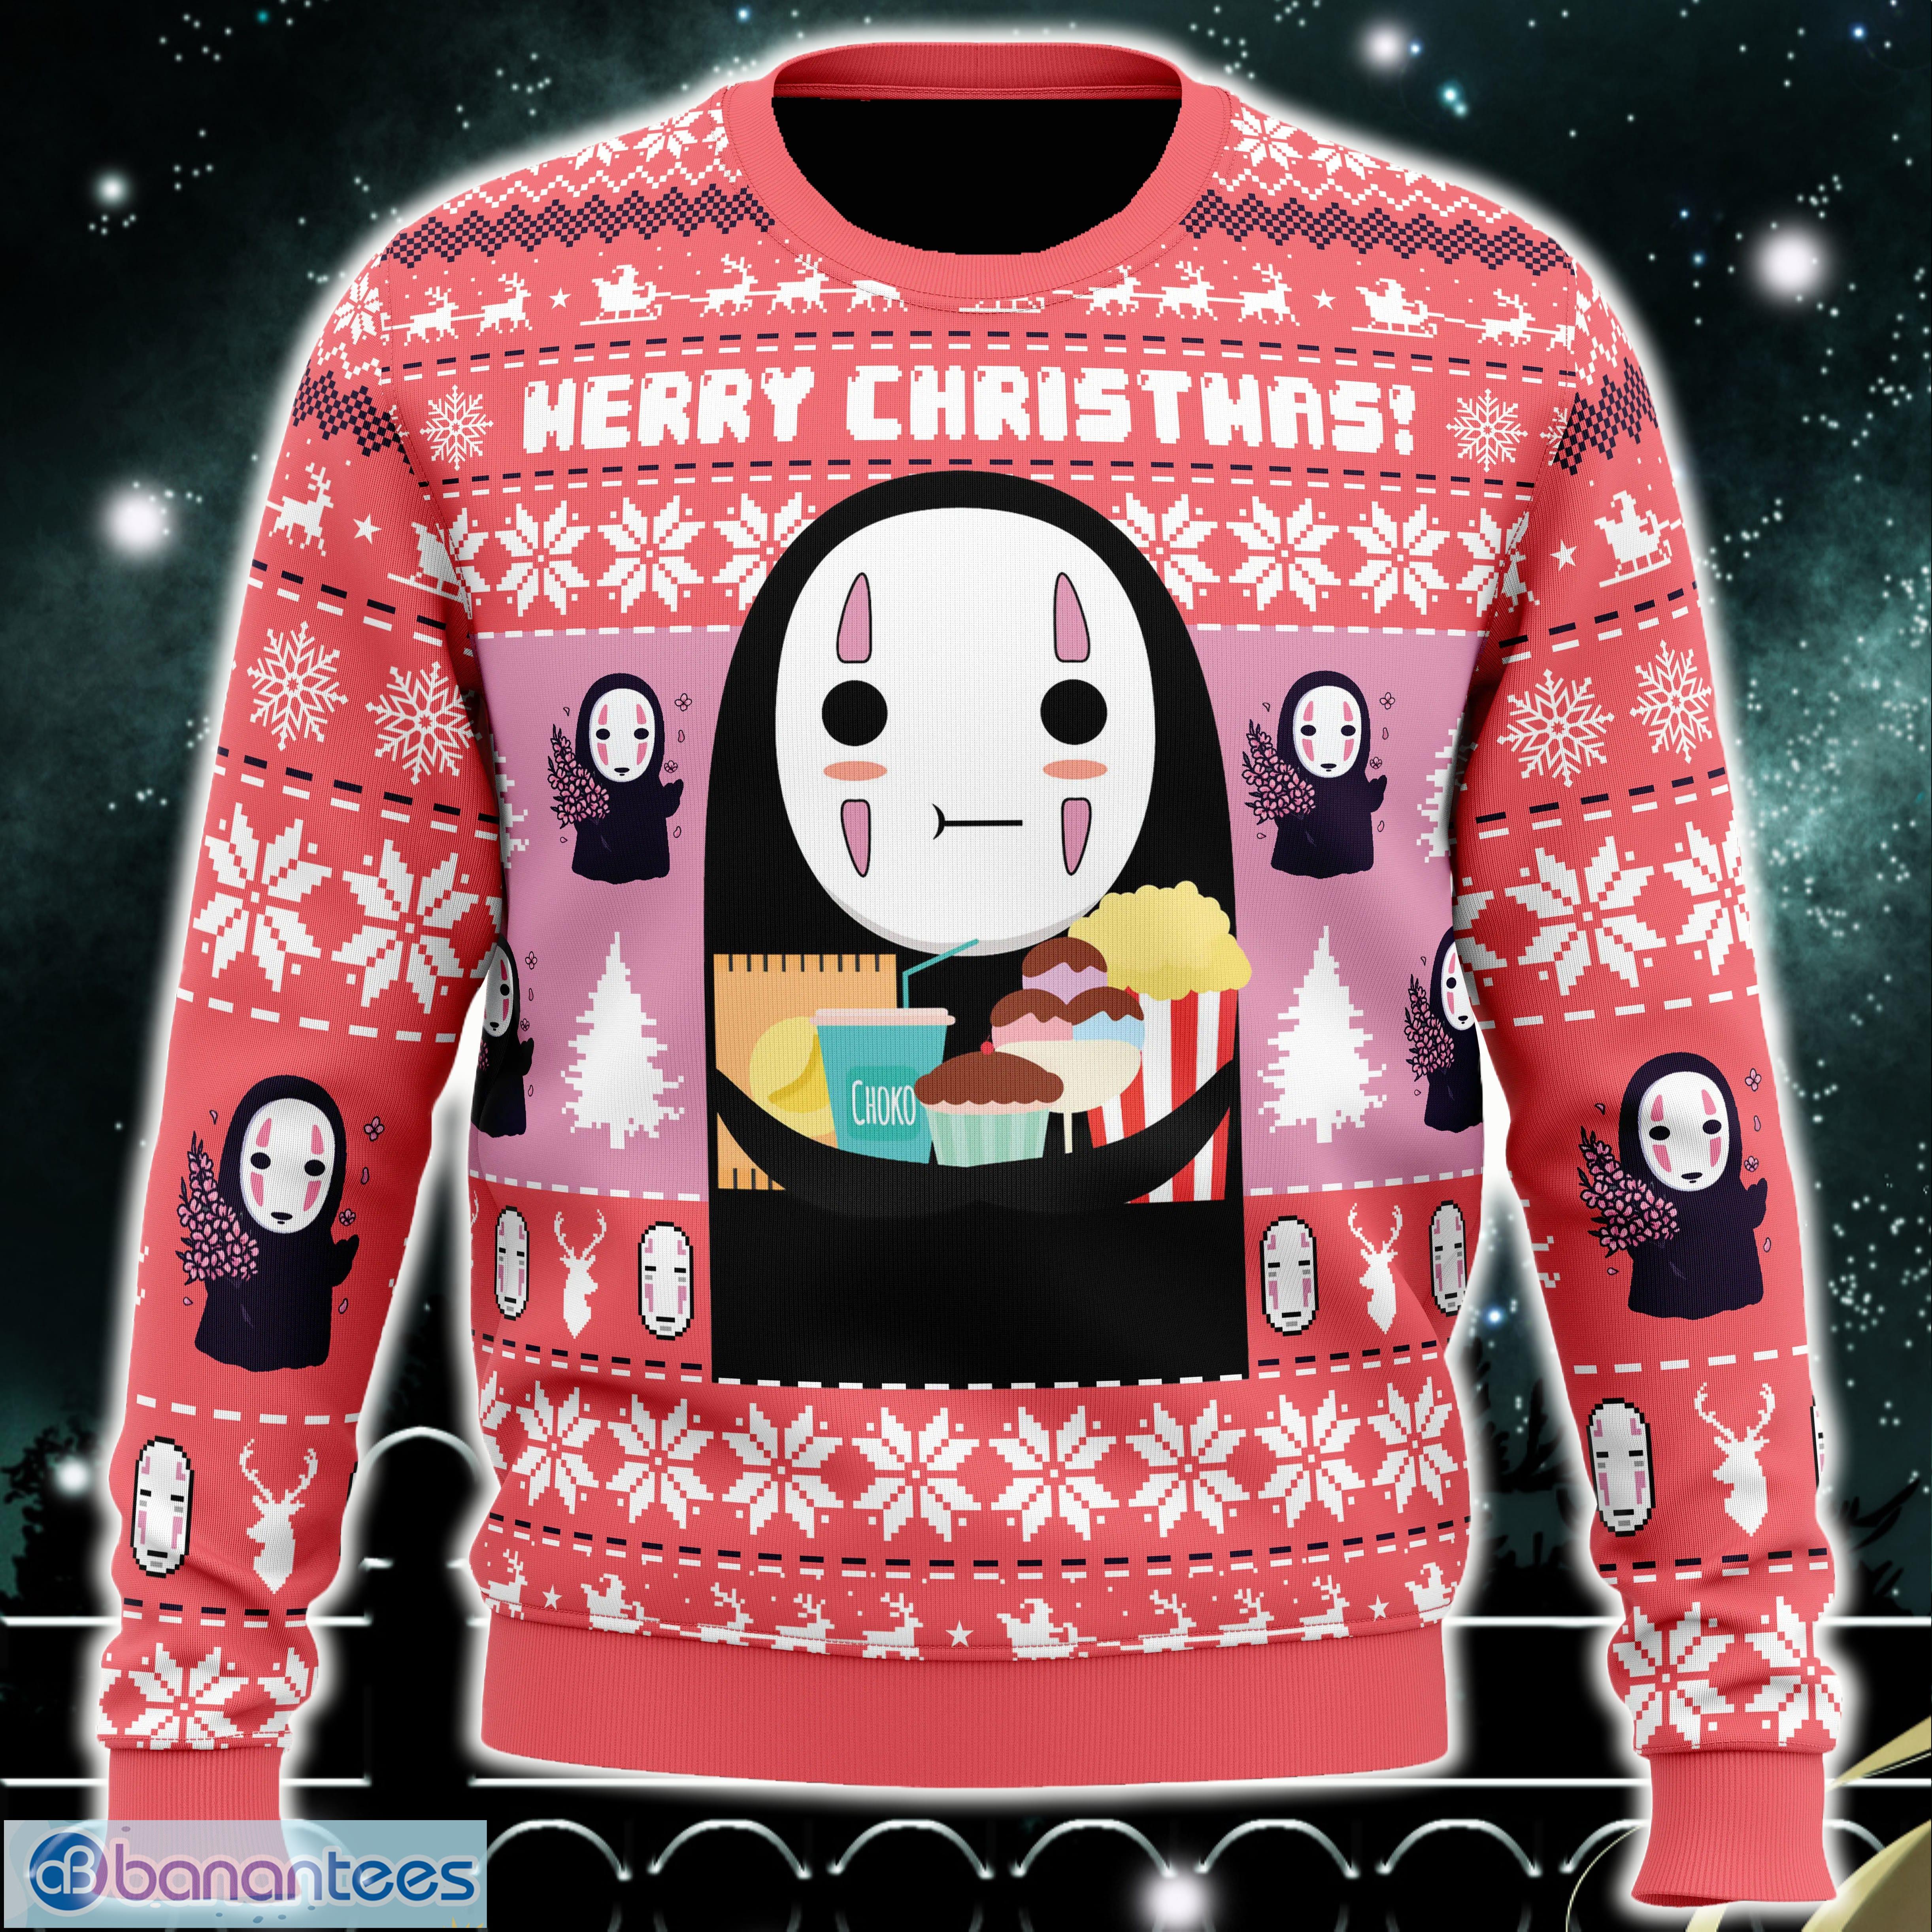 Merry Christmas No Face Spirited Away Ugly Christmas Sweater Funny Gift Ideas Christmas - Merry Christmas No Face Spirited Away Ugly Christmas Sweater_1